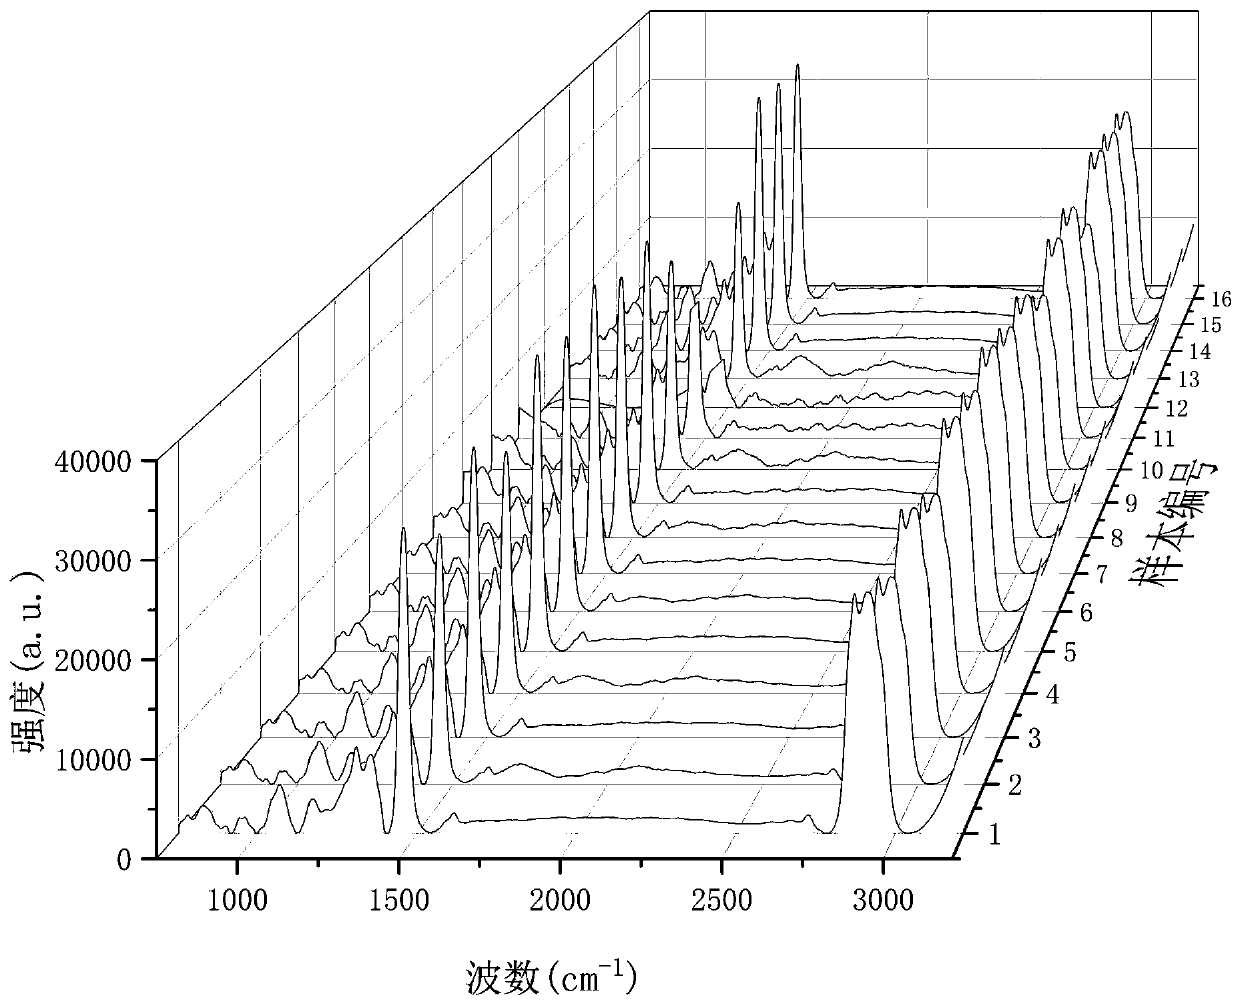 Oil paper insulation equipment aging state identification method based on Raman spectrum clustering analysis